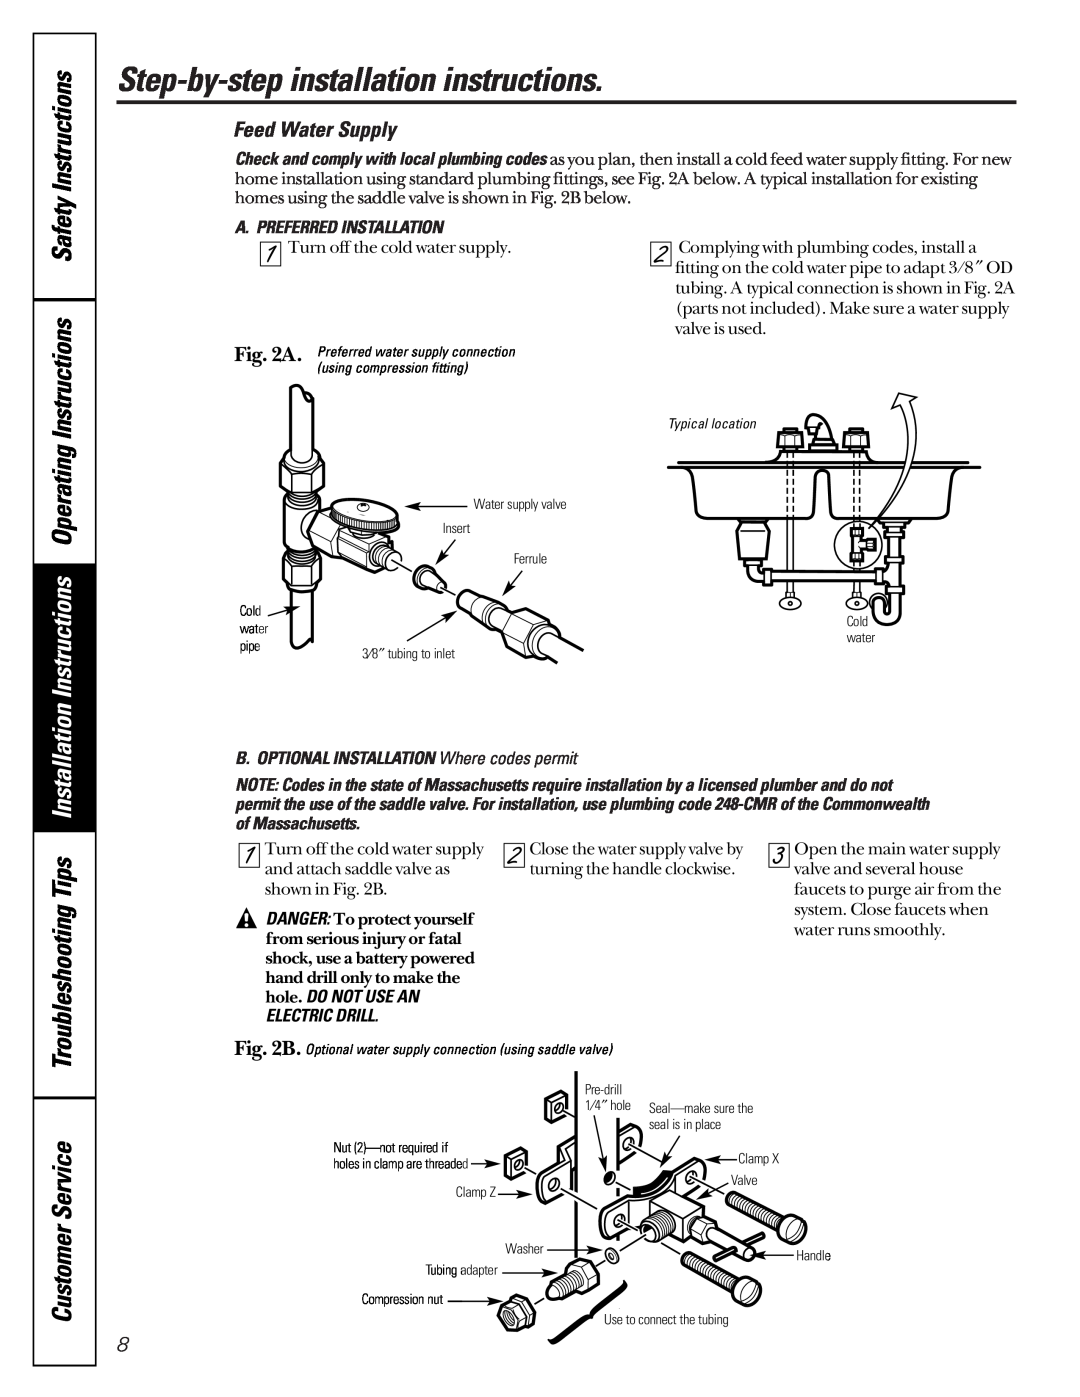 GE GNUT03B Step-by-step installation instructions, Instructions OperatingInstructions, SafetyInstructions, CustomerService 